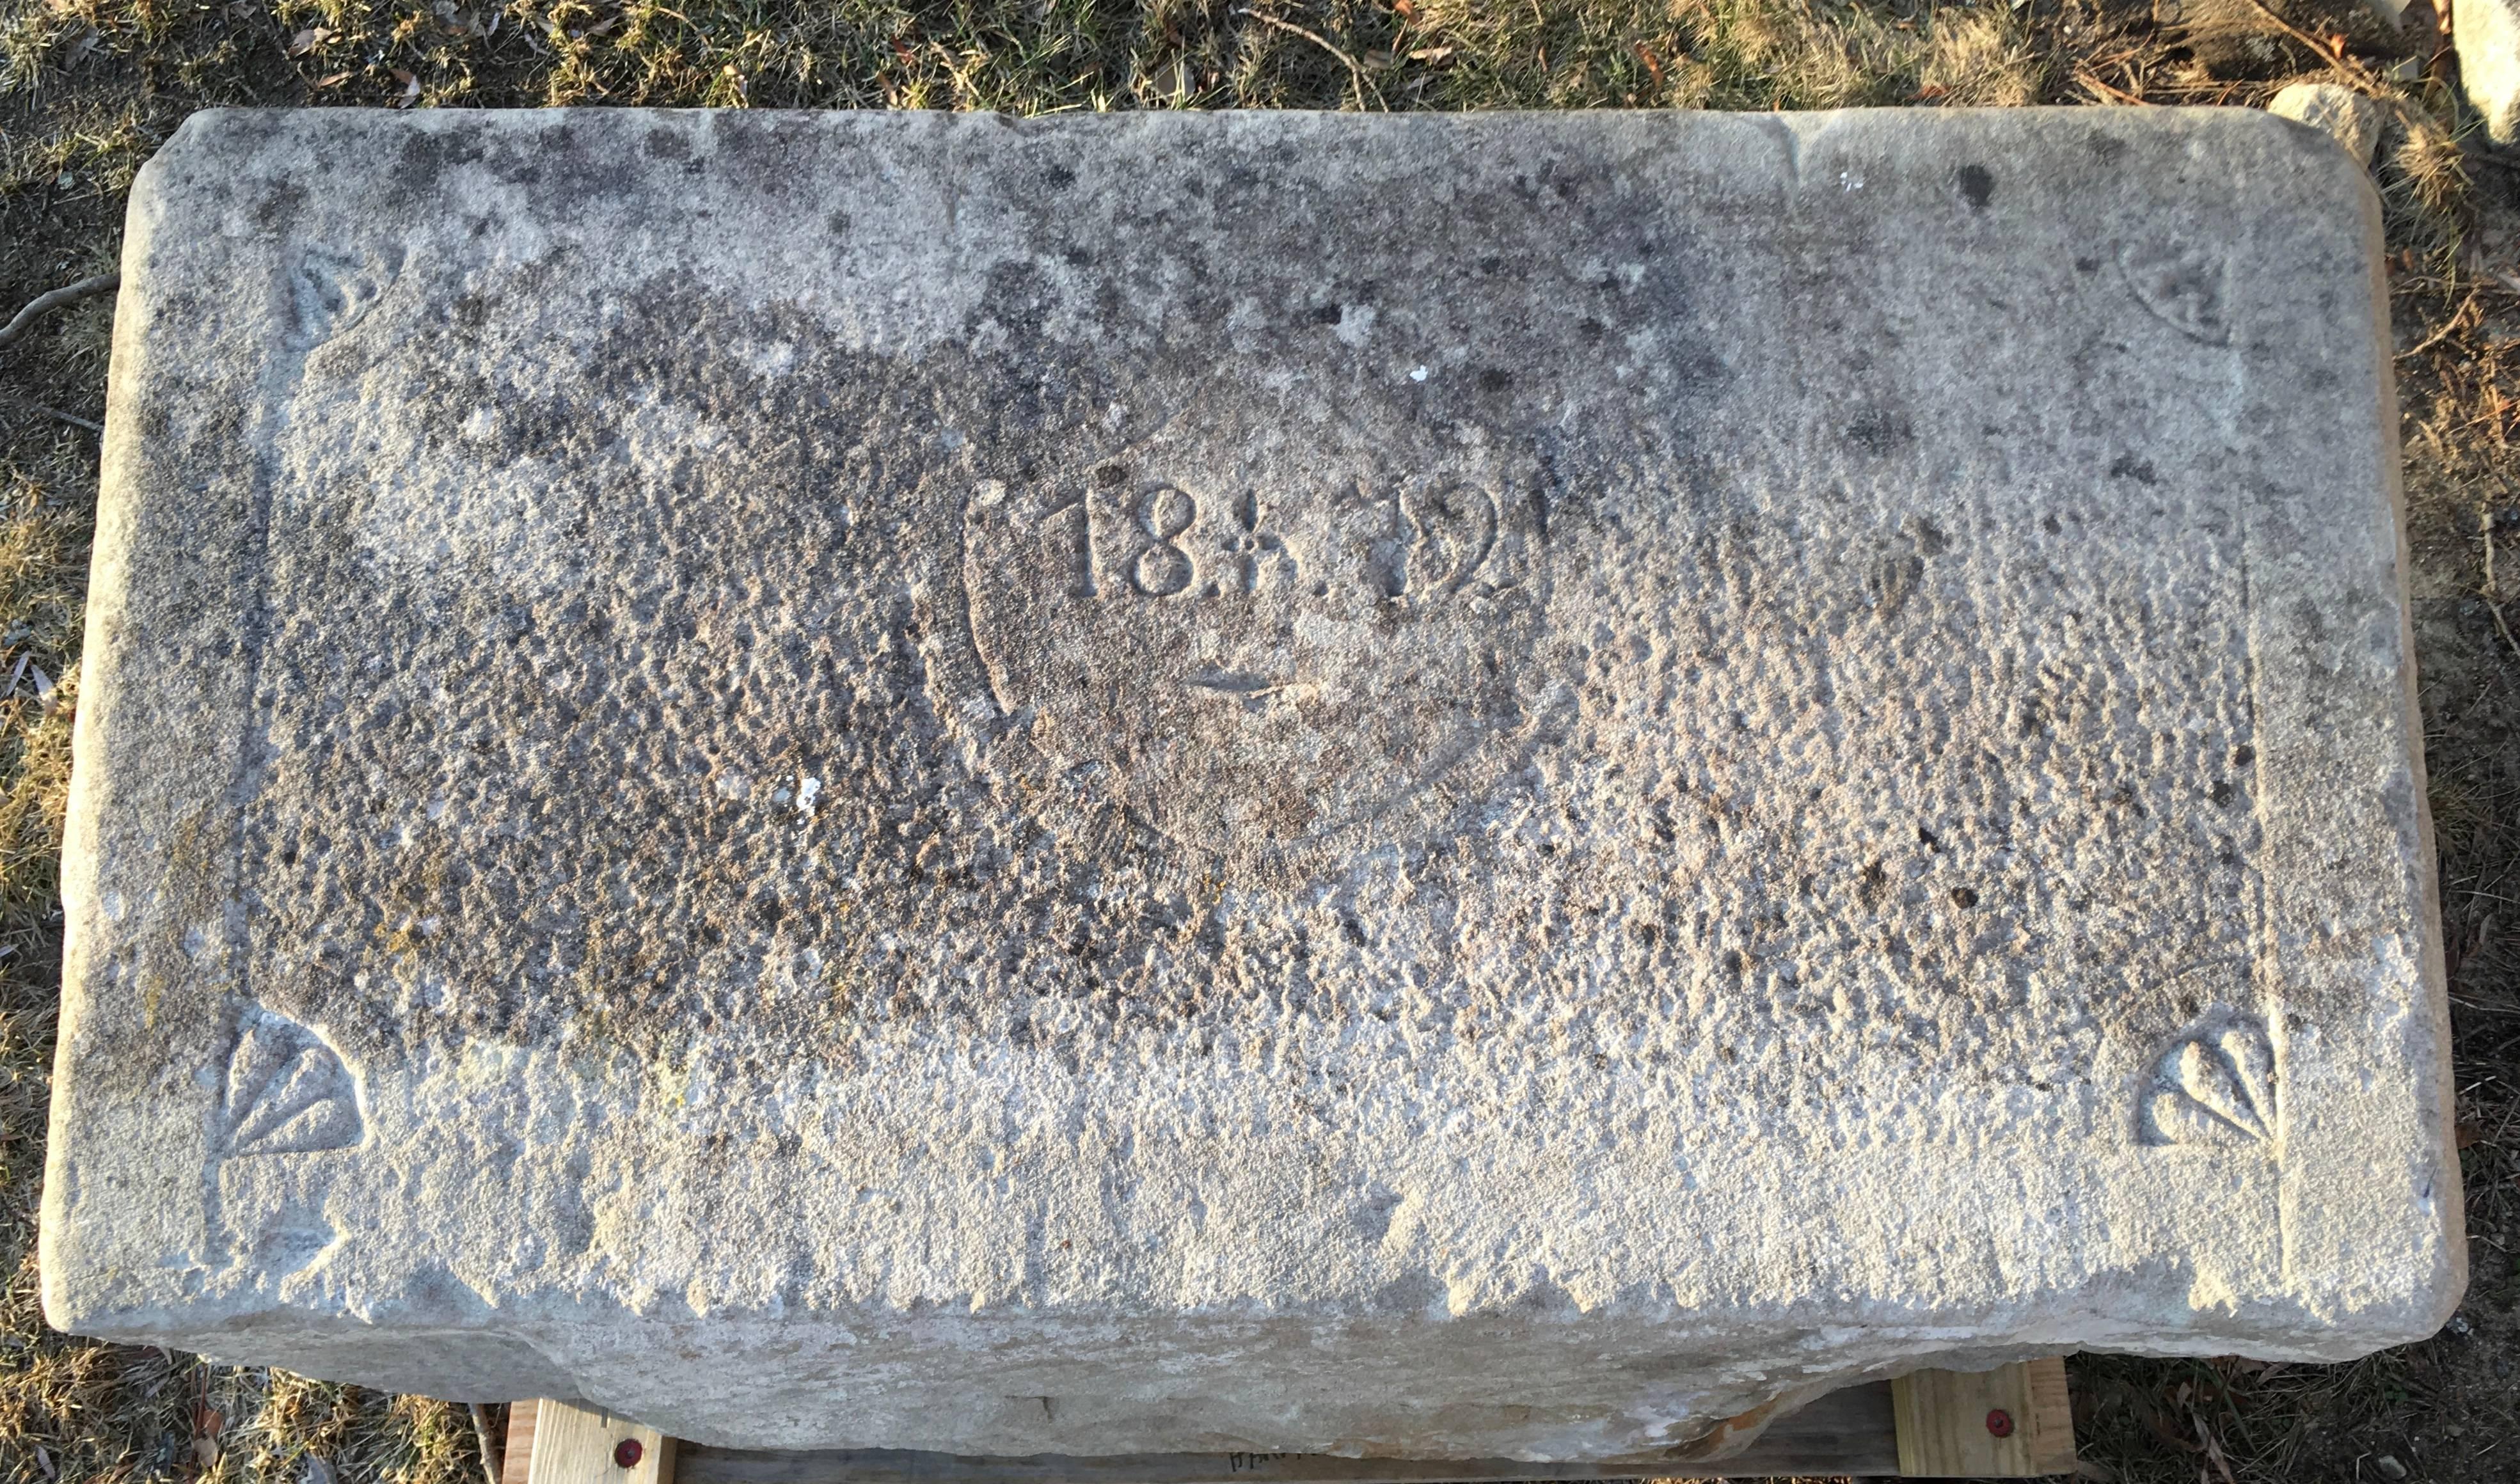 A 19th century carved limestone trough from Switzerland, of rectangular form with incised carved decoration on the front and back, dated 1872 with spandrels in the corners. Wonderful old lichen colored surface. This trough would be beautiful as